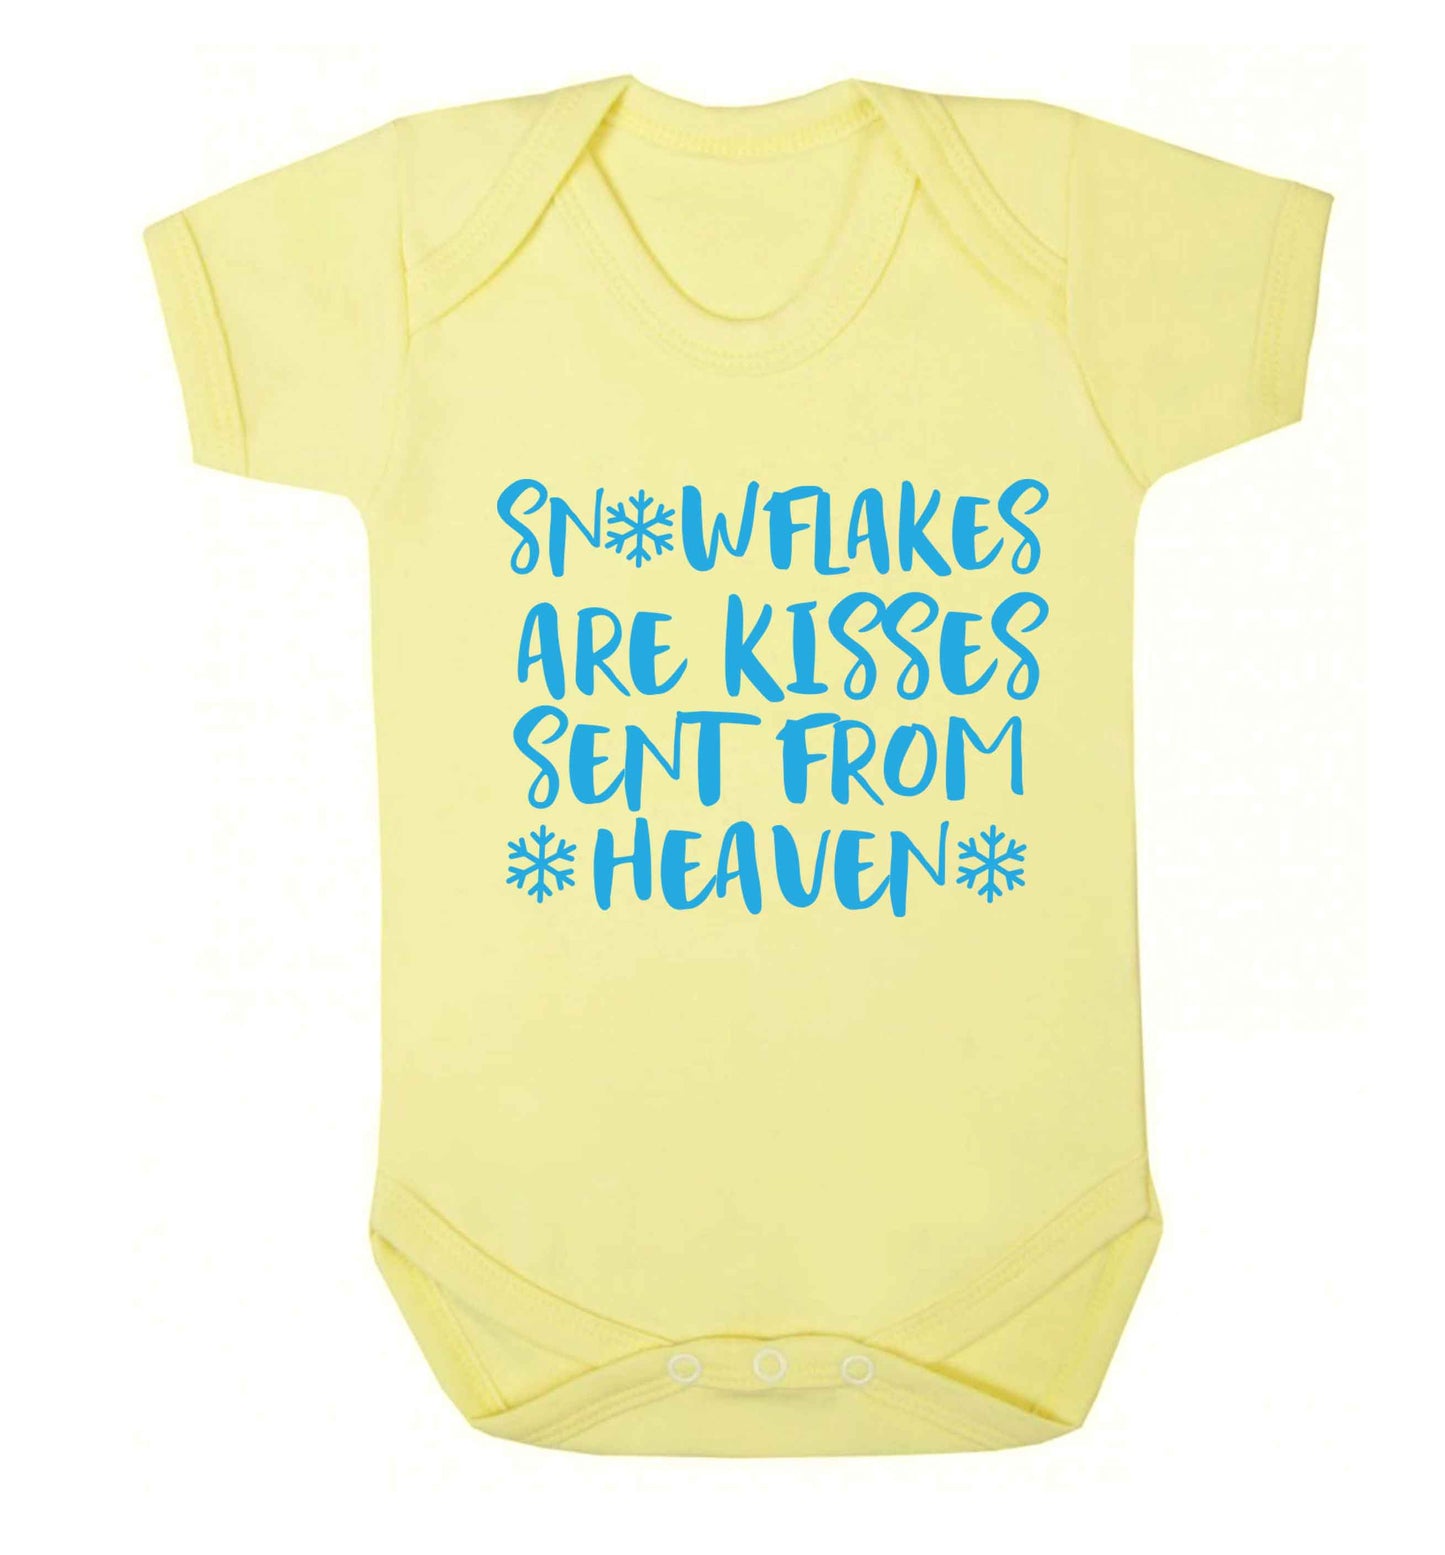 Snowflakes are kisses sent from heaven Baby Vest pale yellow 18-24 months